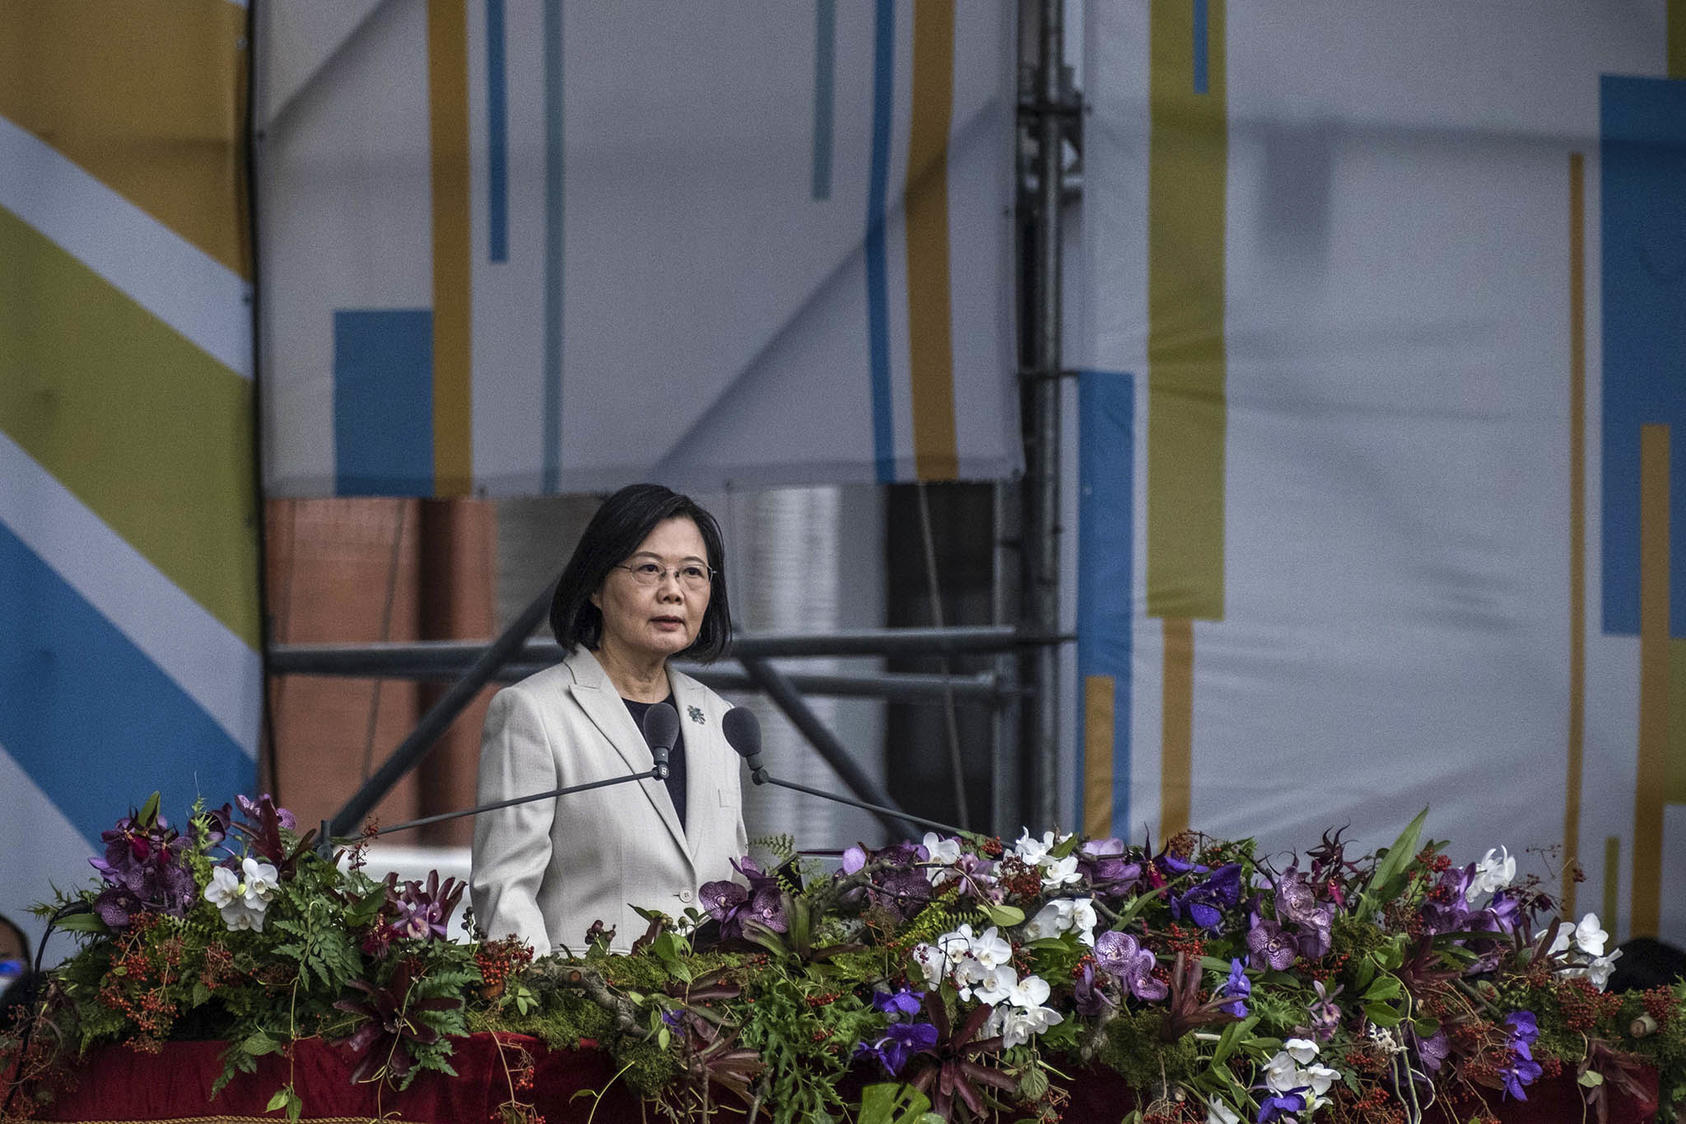 Taiwan's President Tsai Ing-wen gives a speech on the Taiwan's National Day in Taipei, Taiwan on Oct. 10, 2022. (Lam Yik Fei/The New York Times)